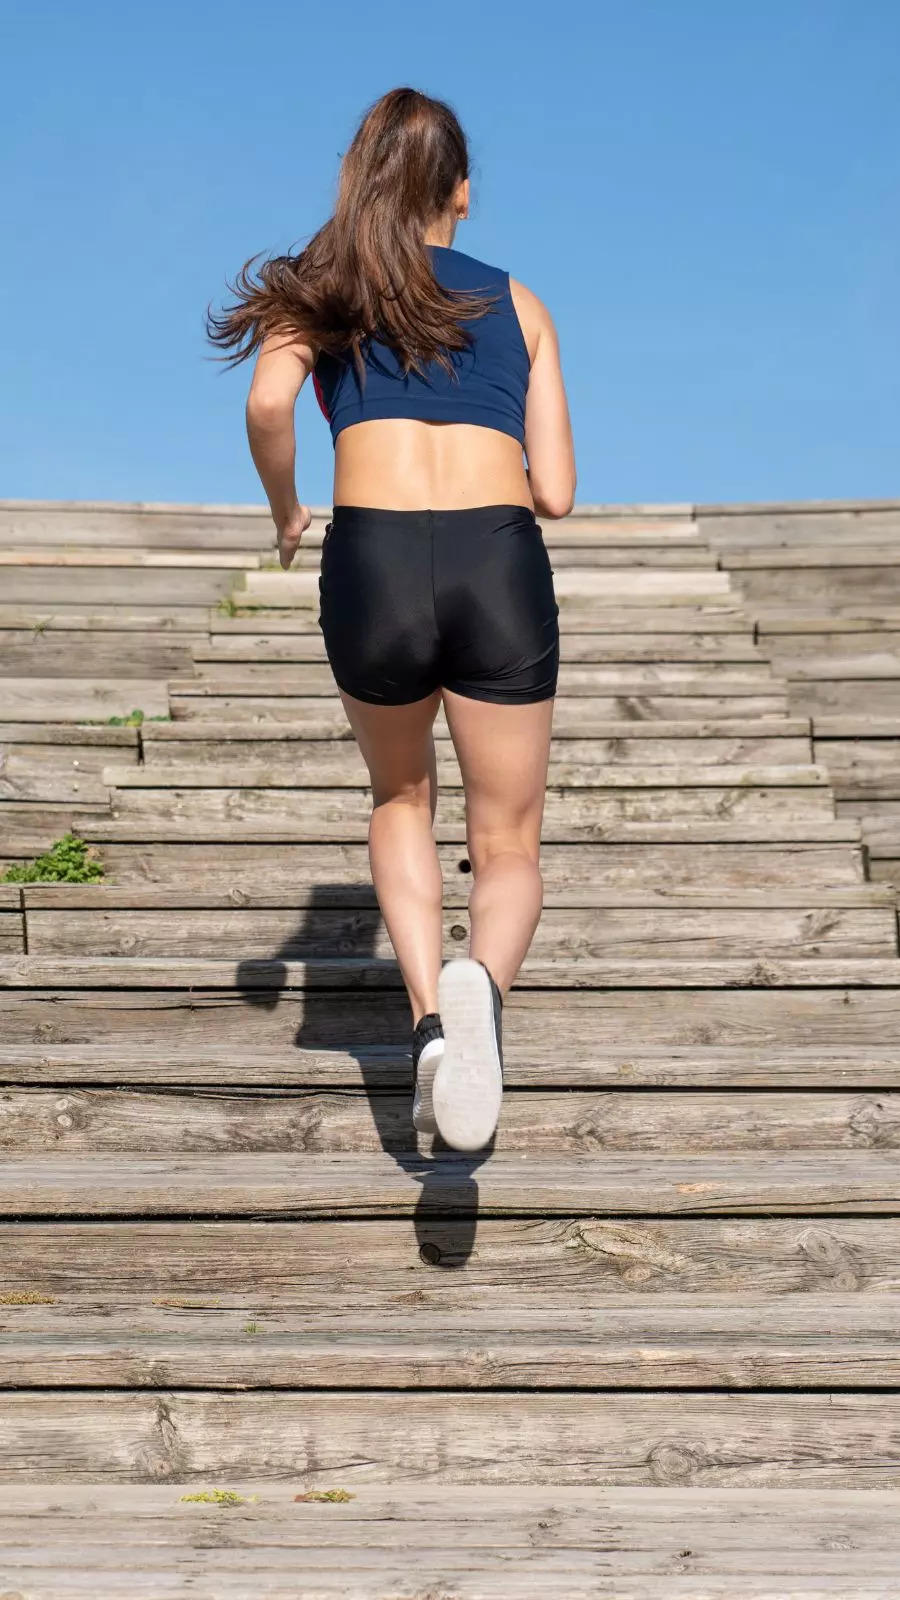 6 stair exercises for weight loss in weeks